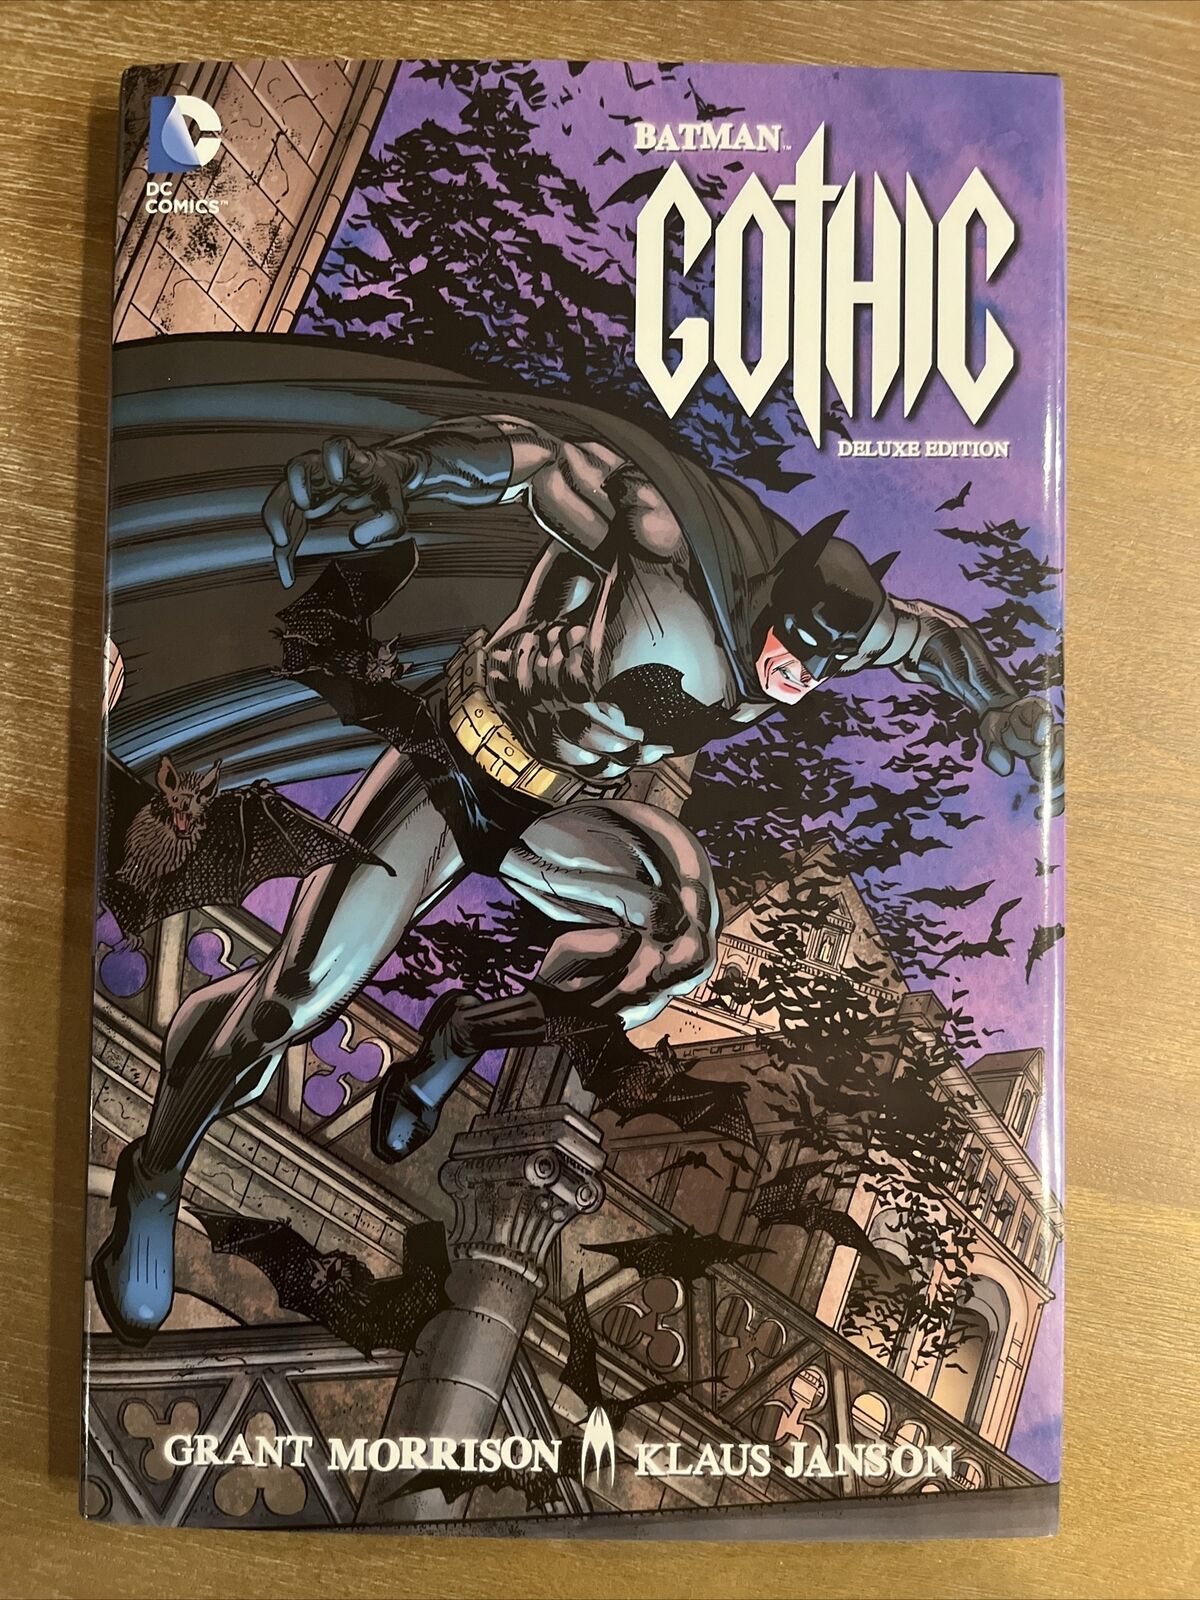 Batman: Gothic Deluxe Edition. Hardcover HC. DC Comics. First print, OOP.